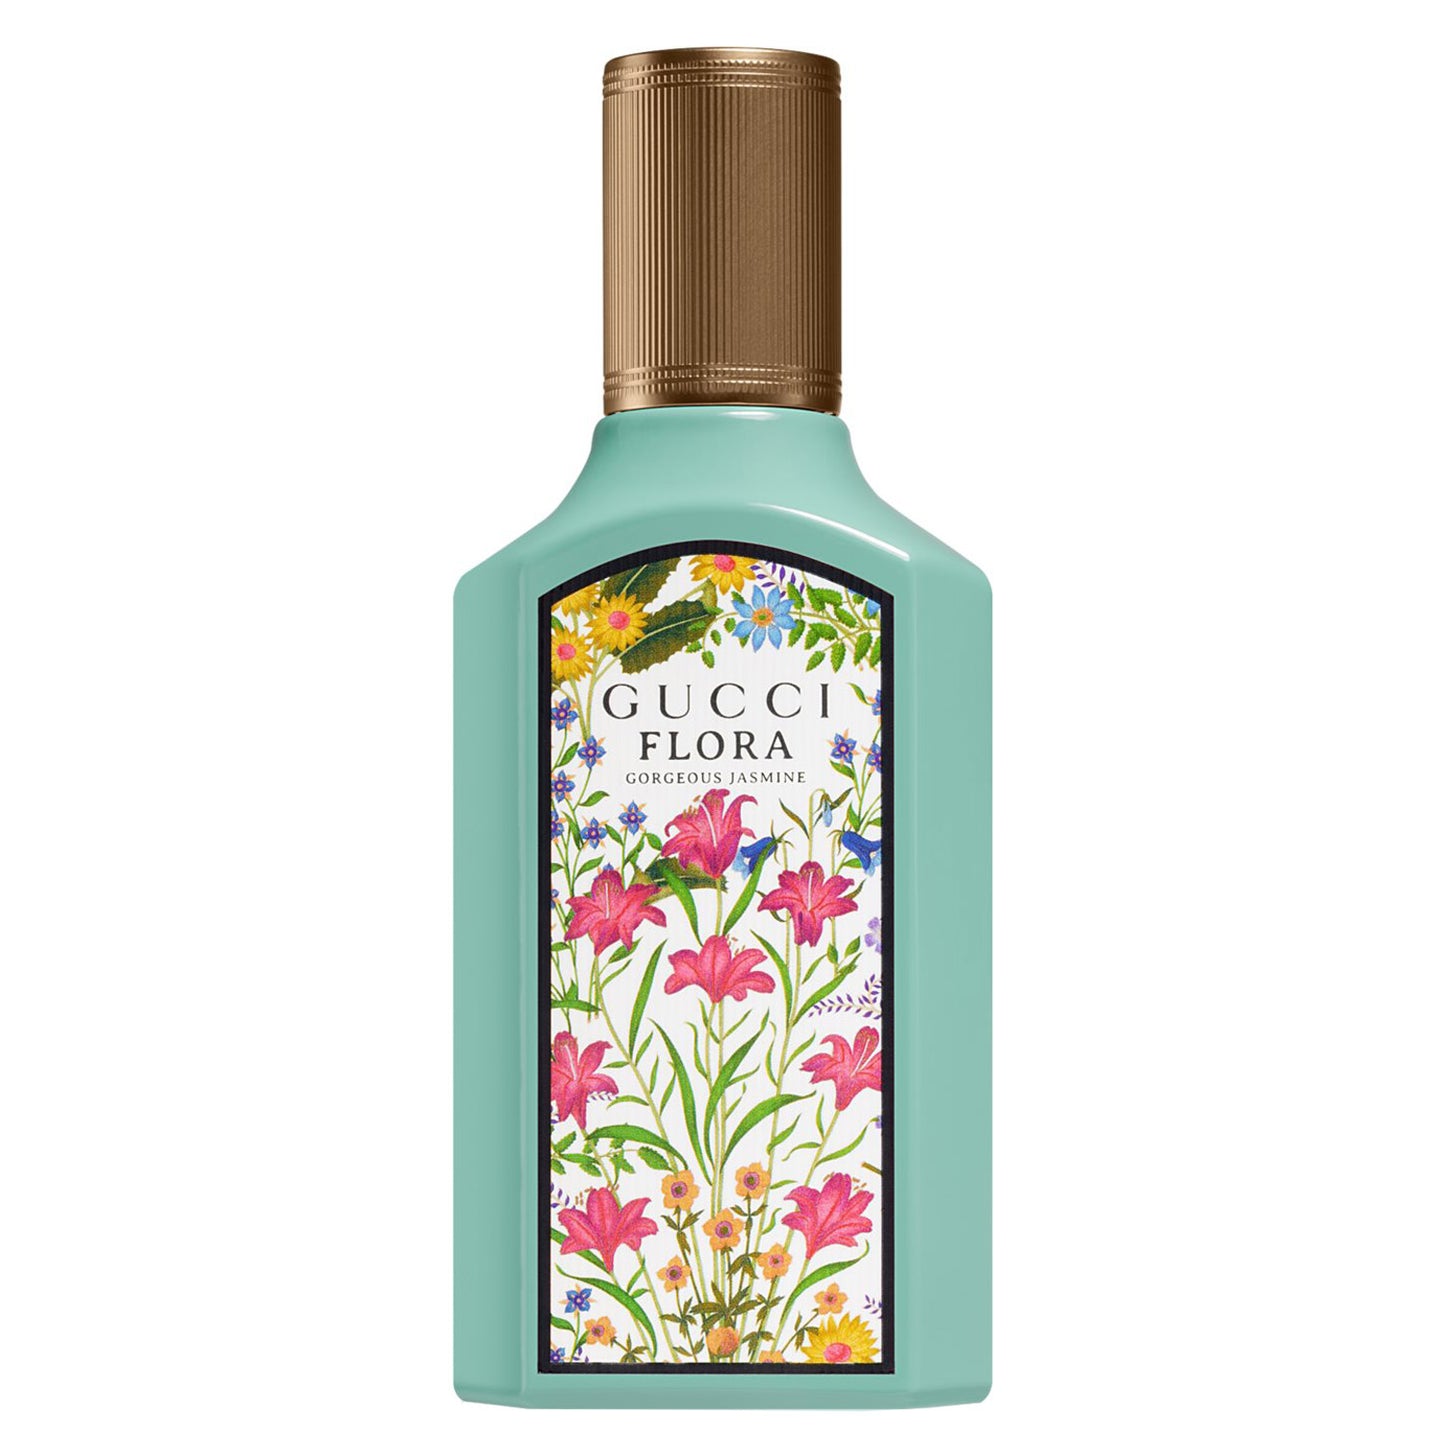 Gucci Flora Gorgeous Jasmine – The Scented